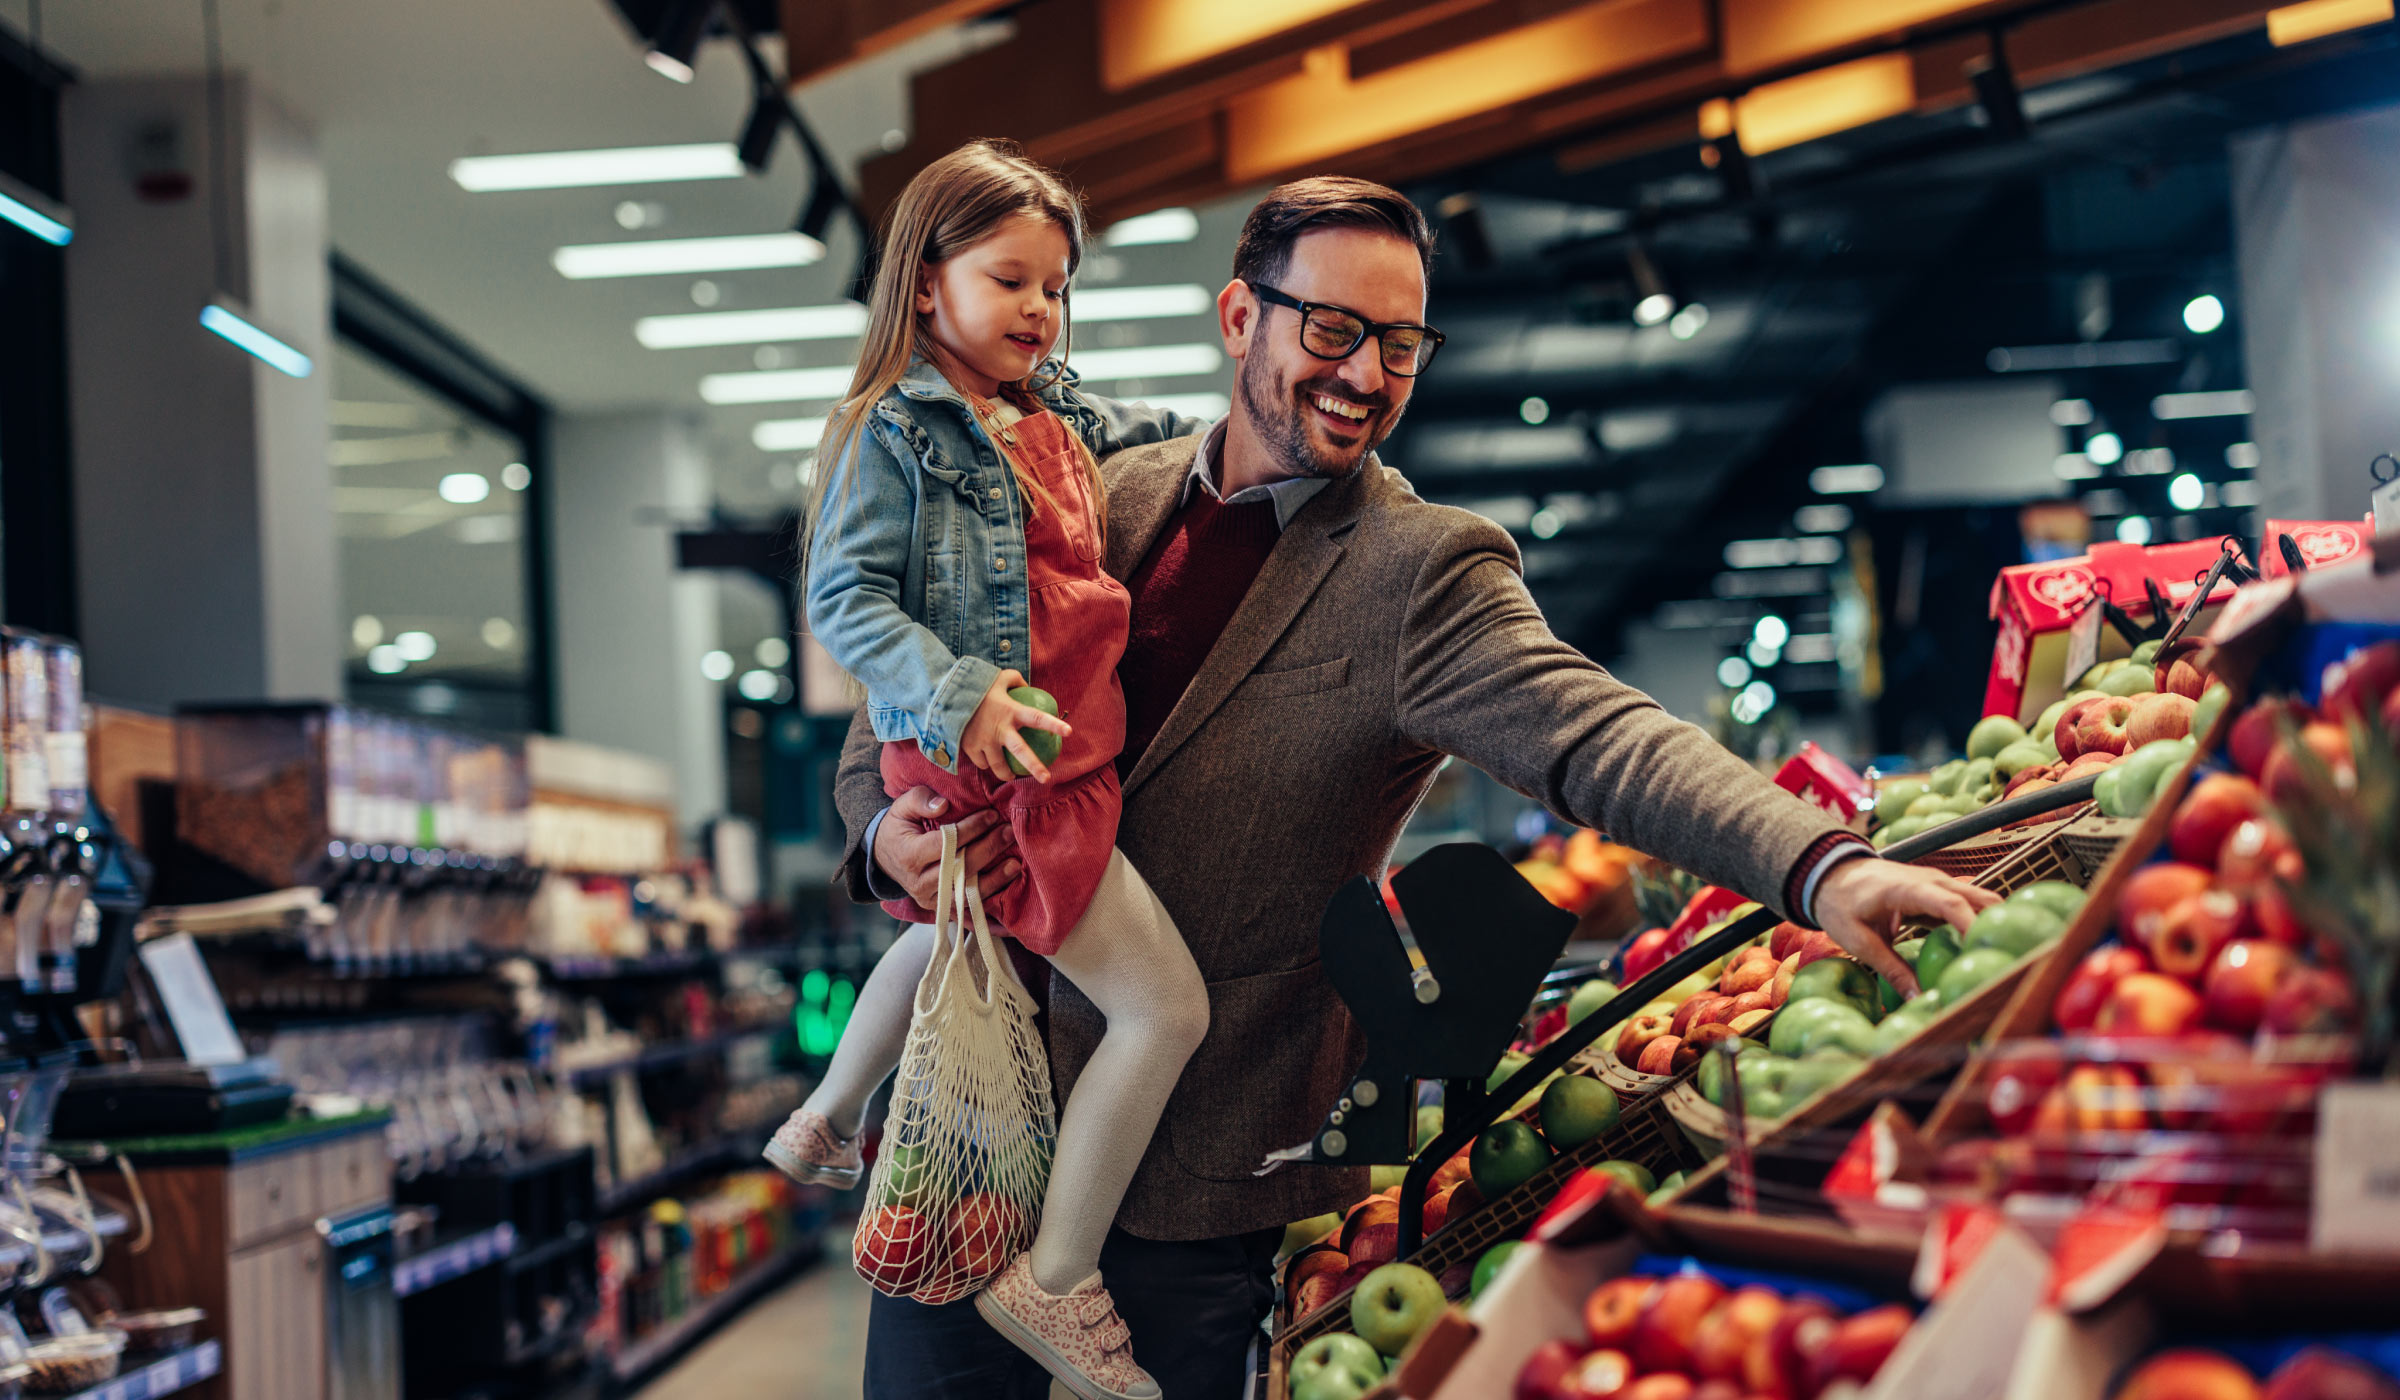 A man holding his daughter while shopping for produce in a grocery store